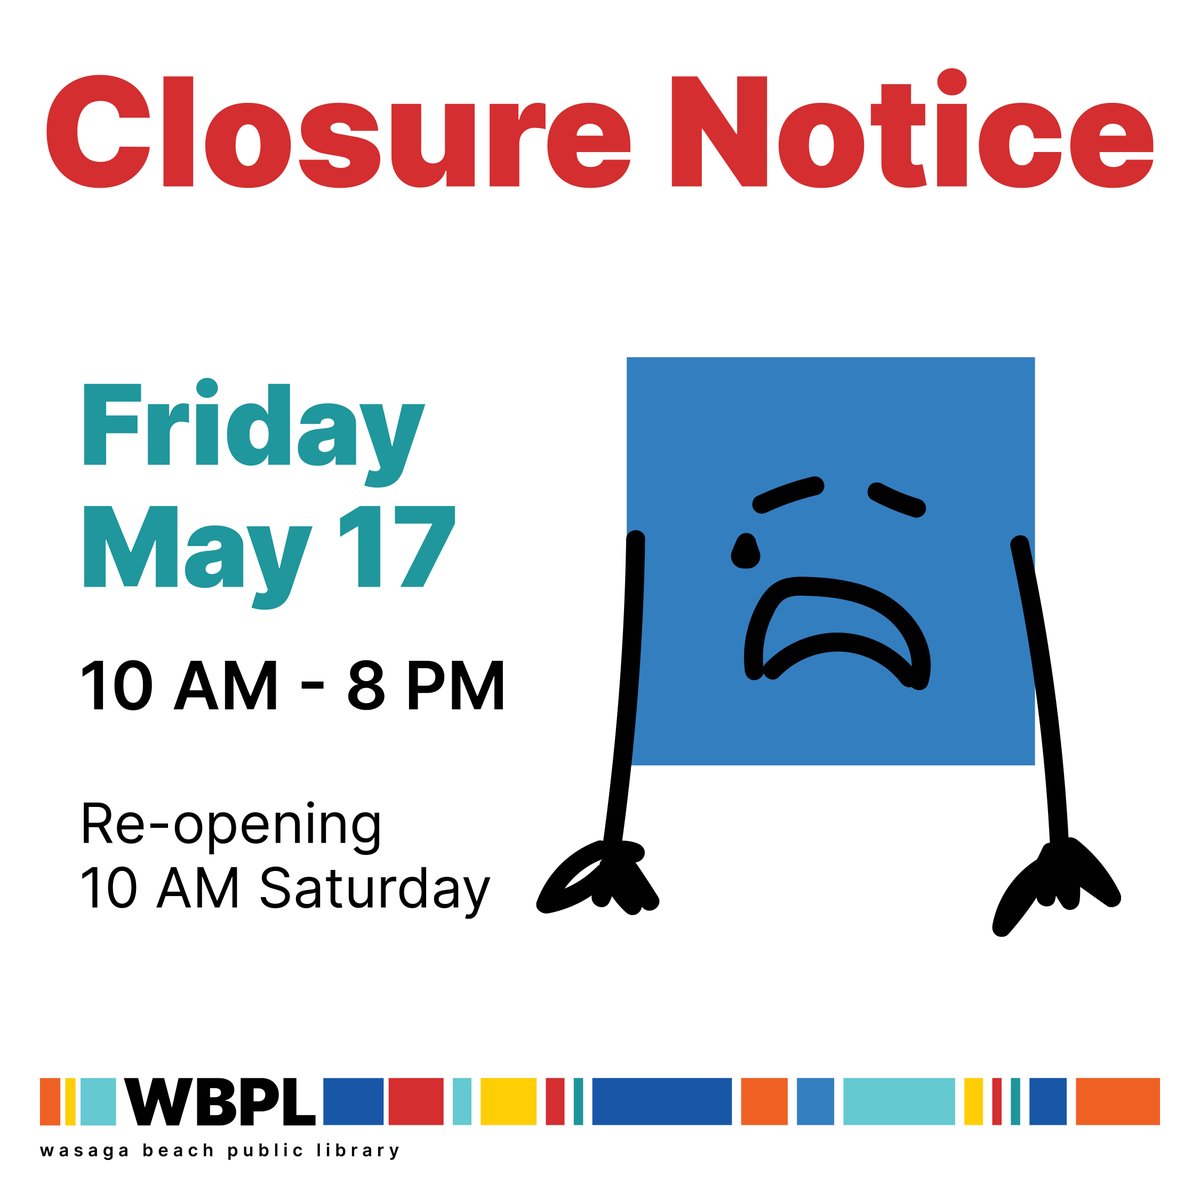 🚨 Heads up, friends! The library will be closed today from 10 AM - 8 PM for staff training. We'll reopen bright and early at 10 AM tomorrow. Thanks for your understanding! 📚 #LibraryClosure #WasagaBeach #FindItHere